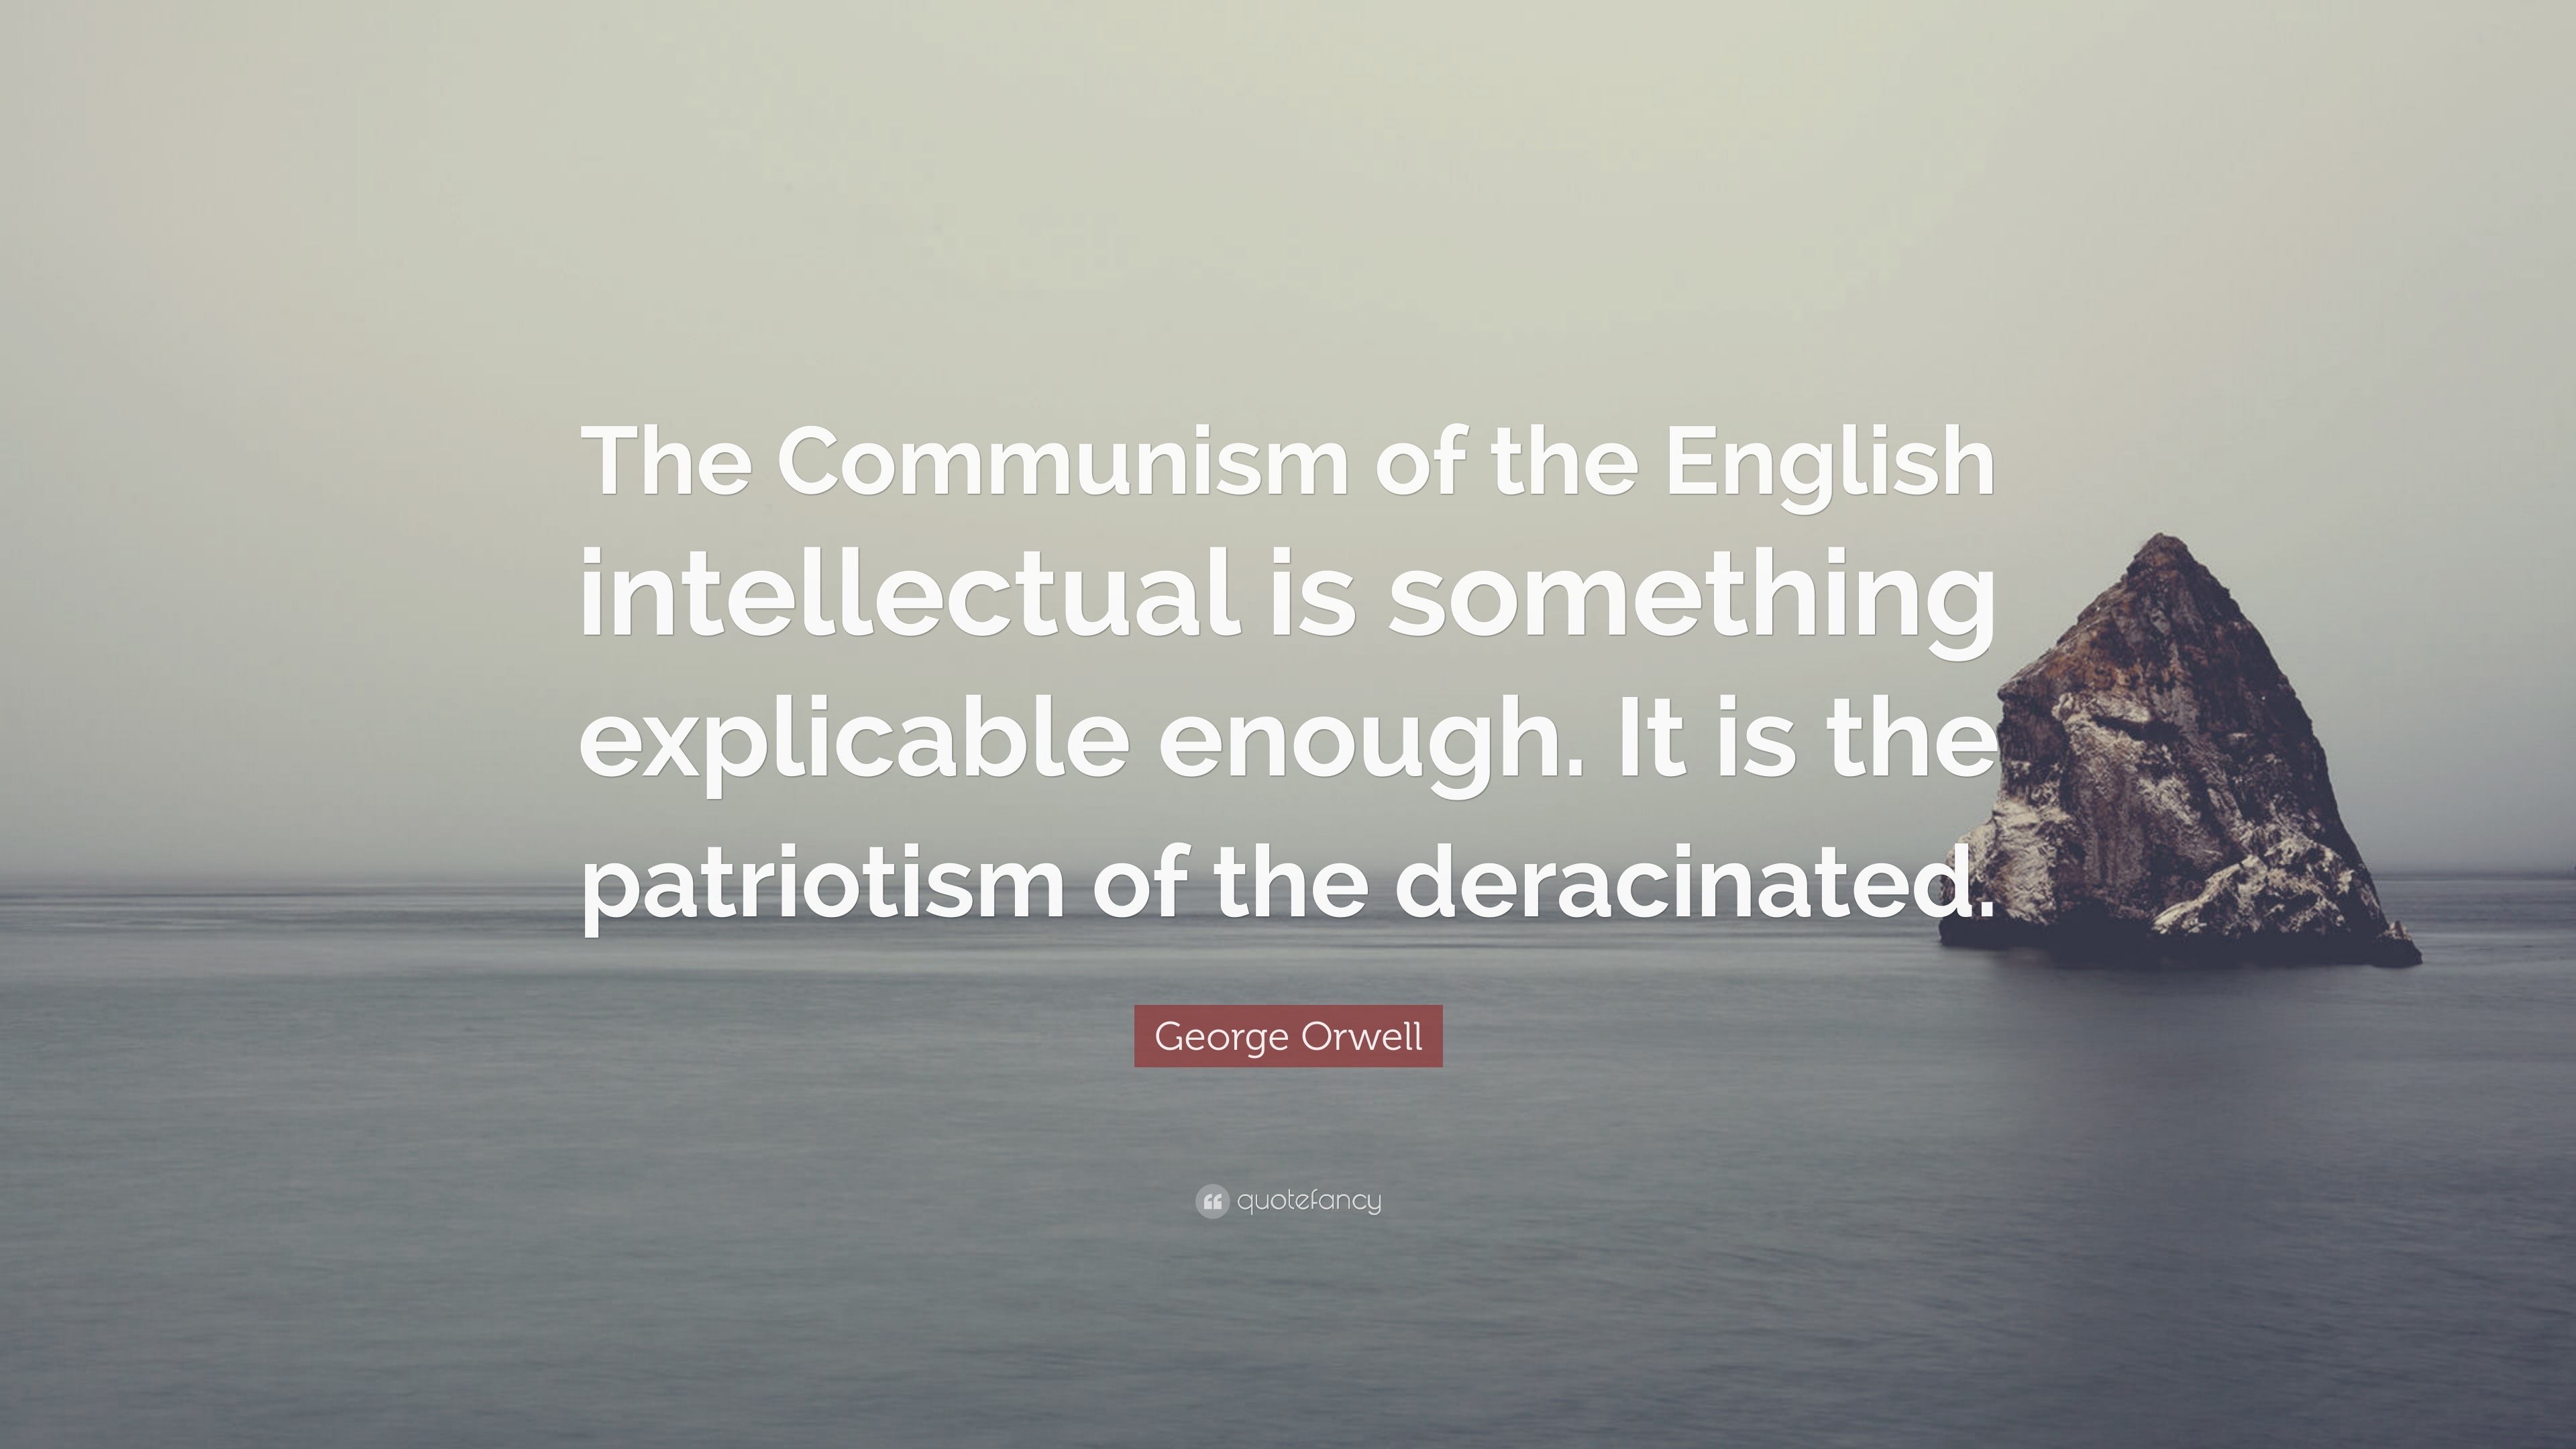 George Orwell Quote: "The Communism of the English ...